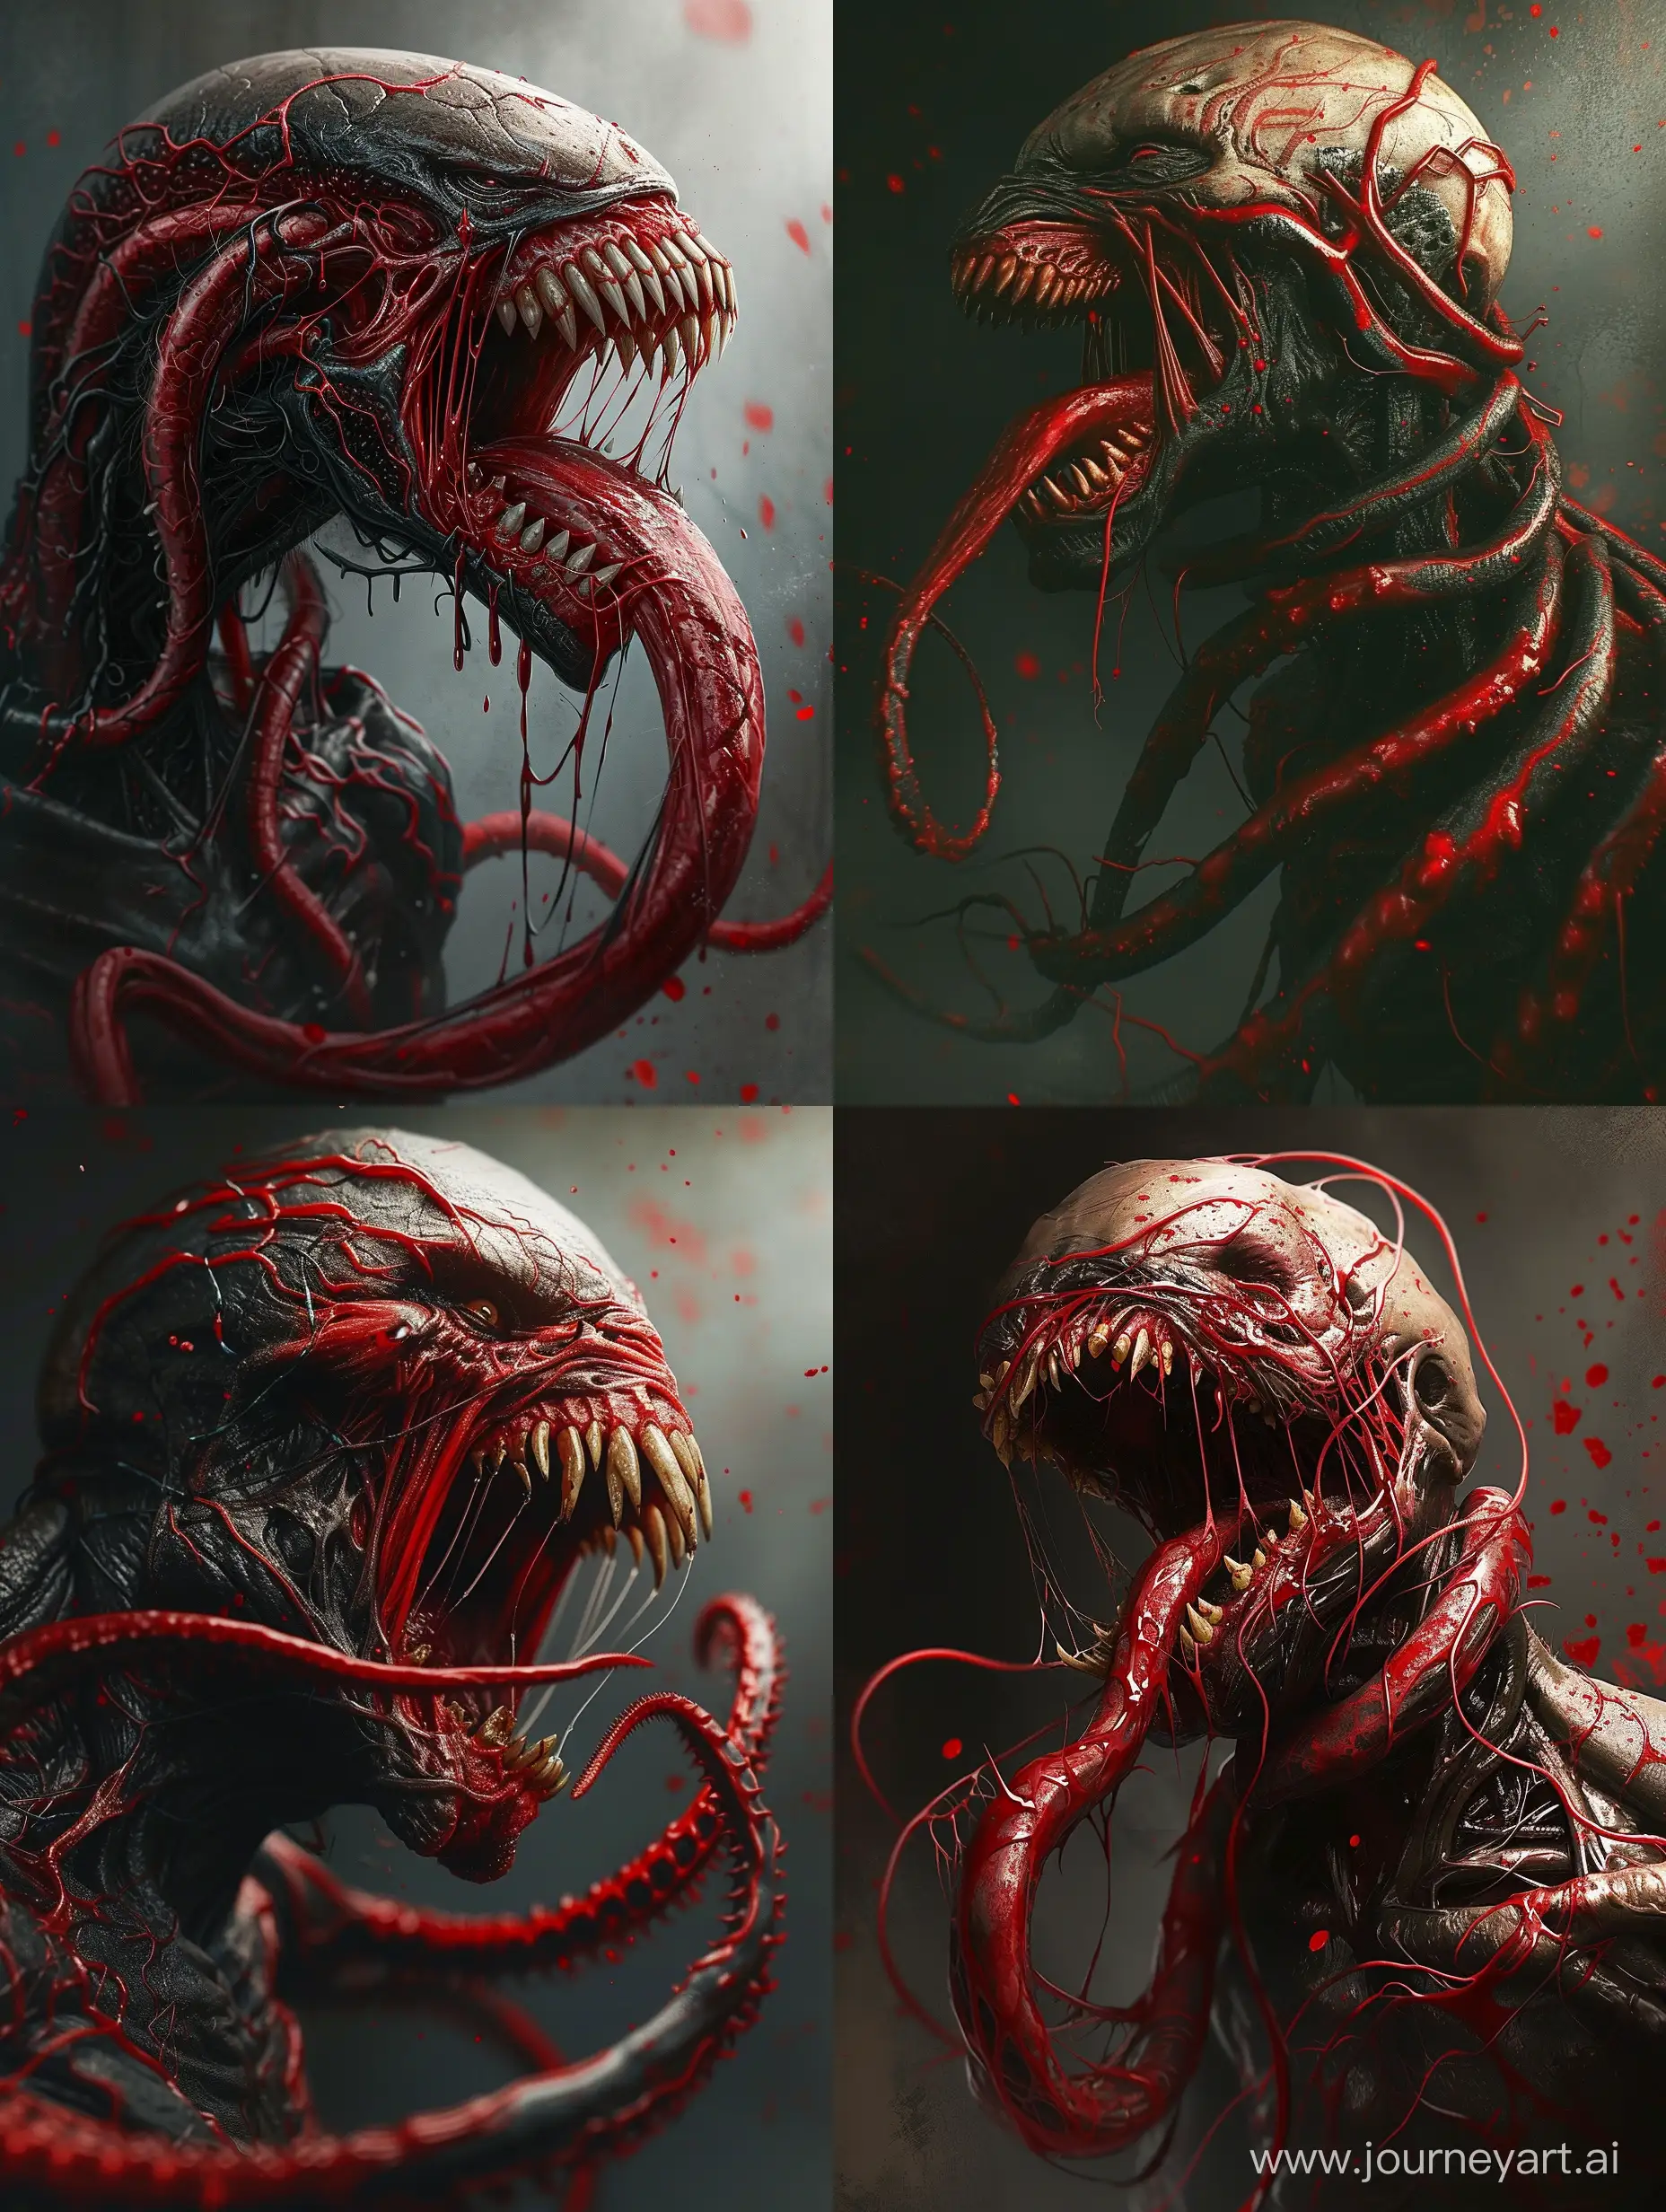 Menacing-Red-and-Black-Monster-with-Elongated-Tongue-in-Dark-Palette